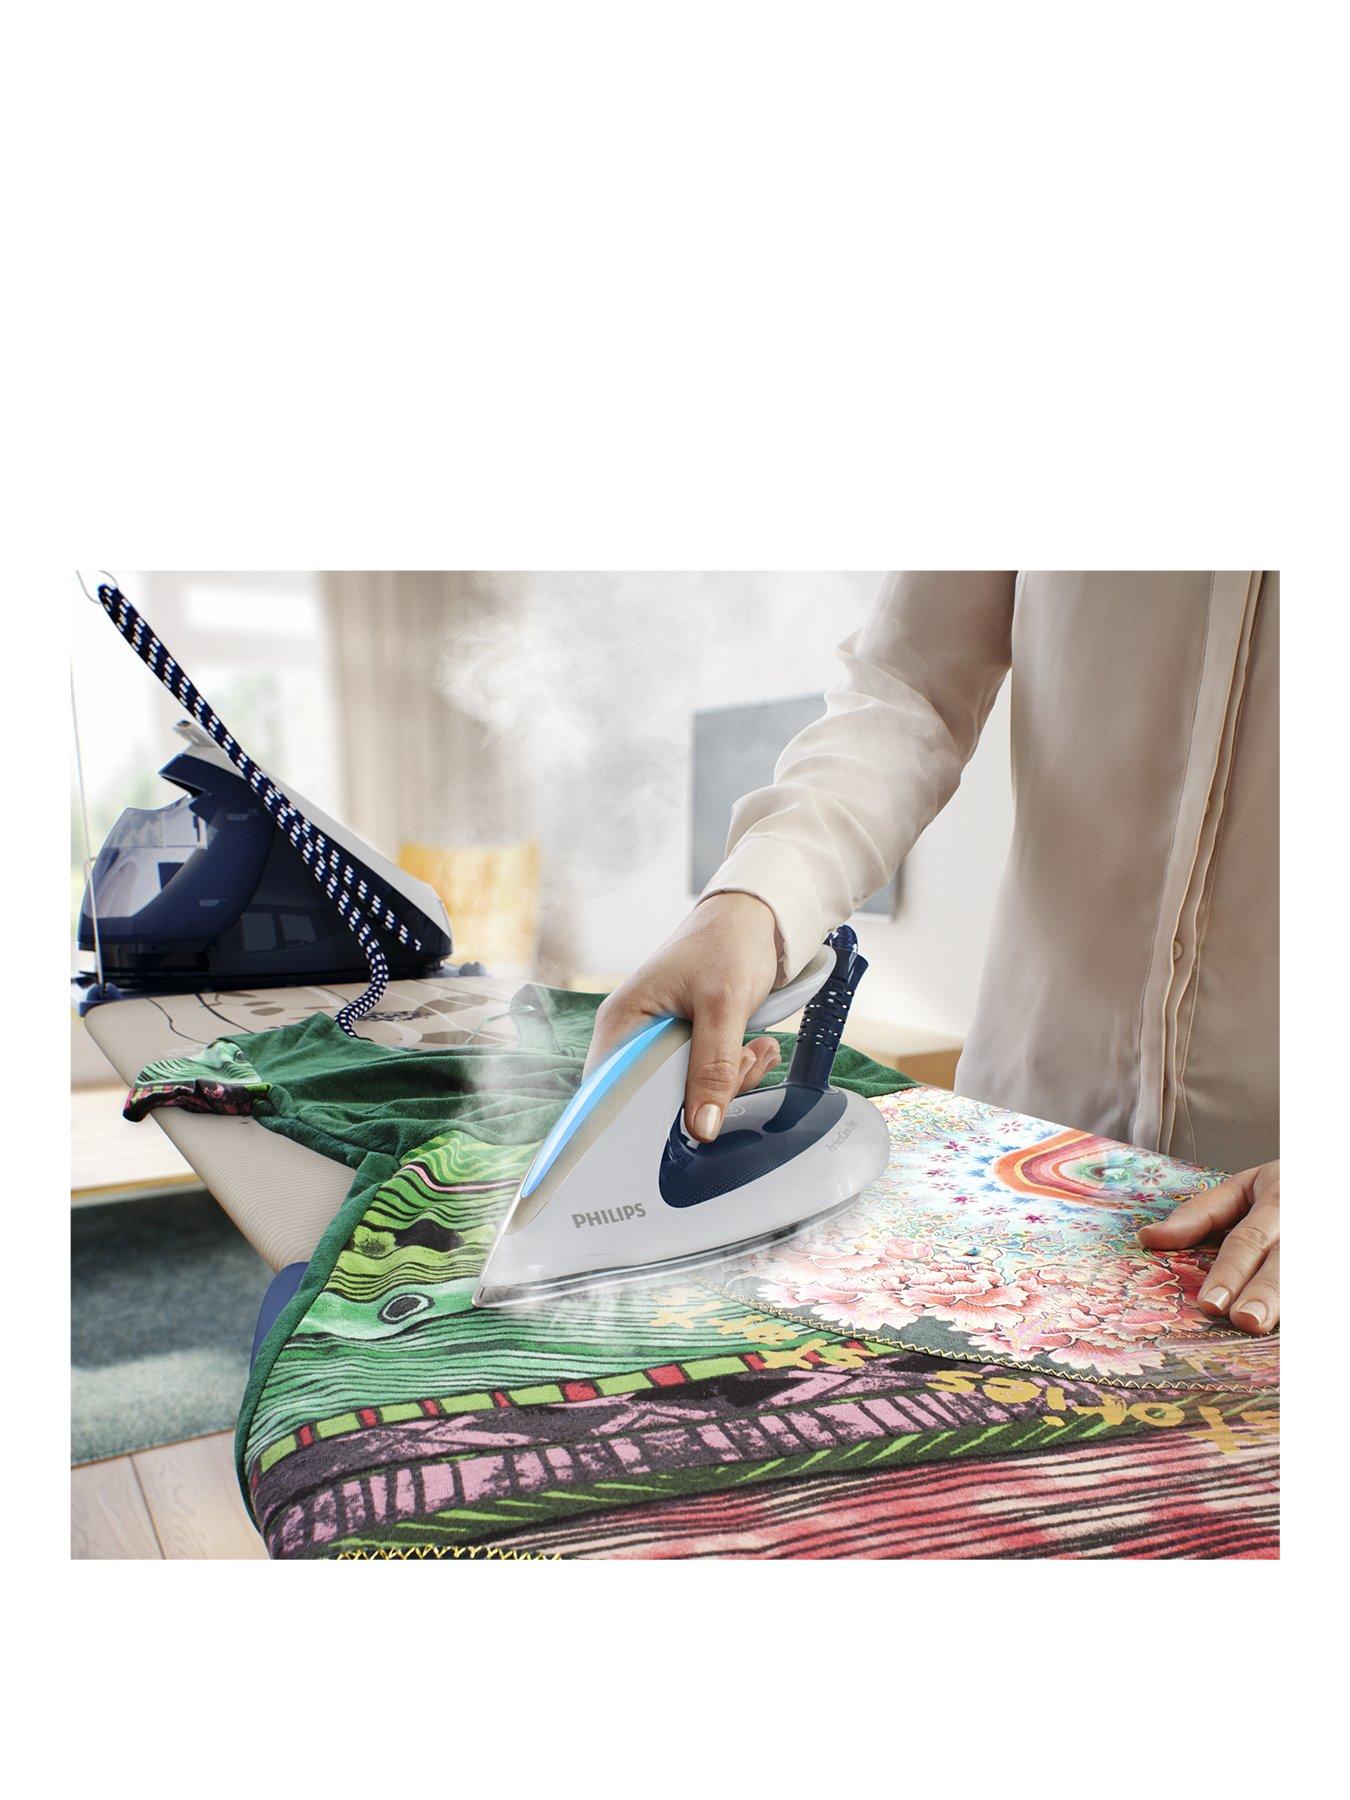 Philips Philips Perfectcare Elite Steam Generator Iron Gc9630/20 With Optimal Temperature And 420G Steam Boost – Navy